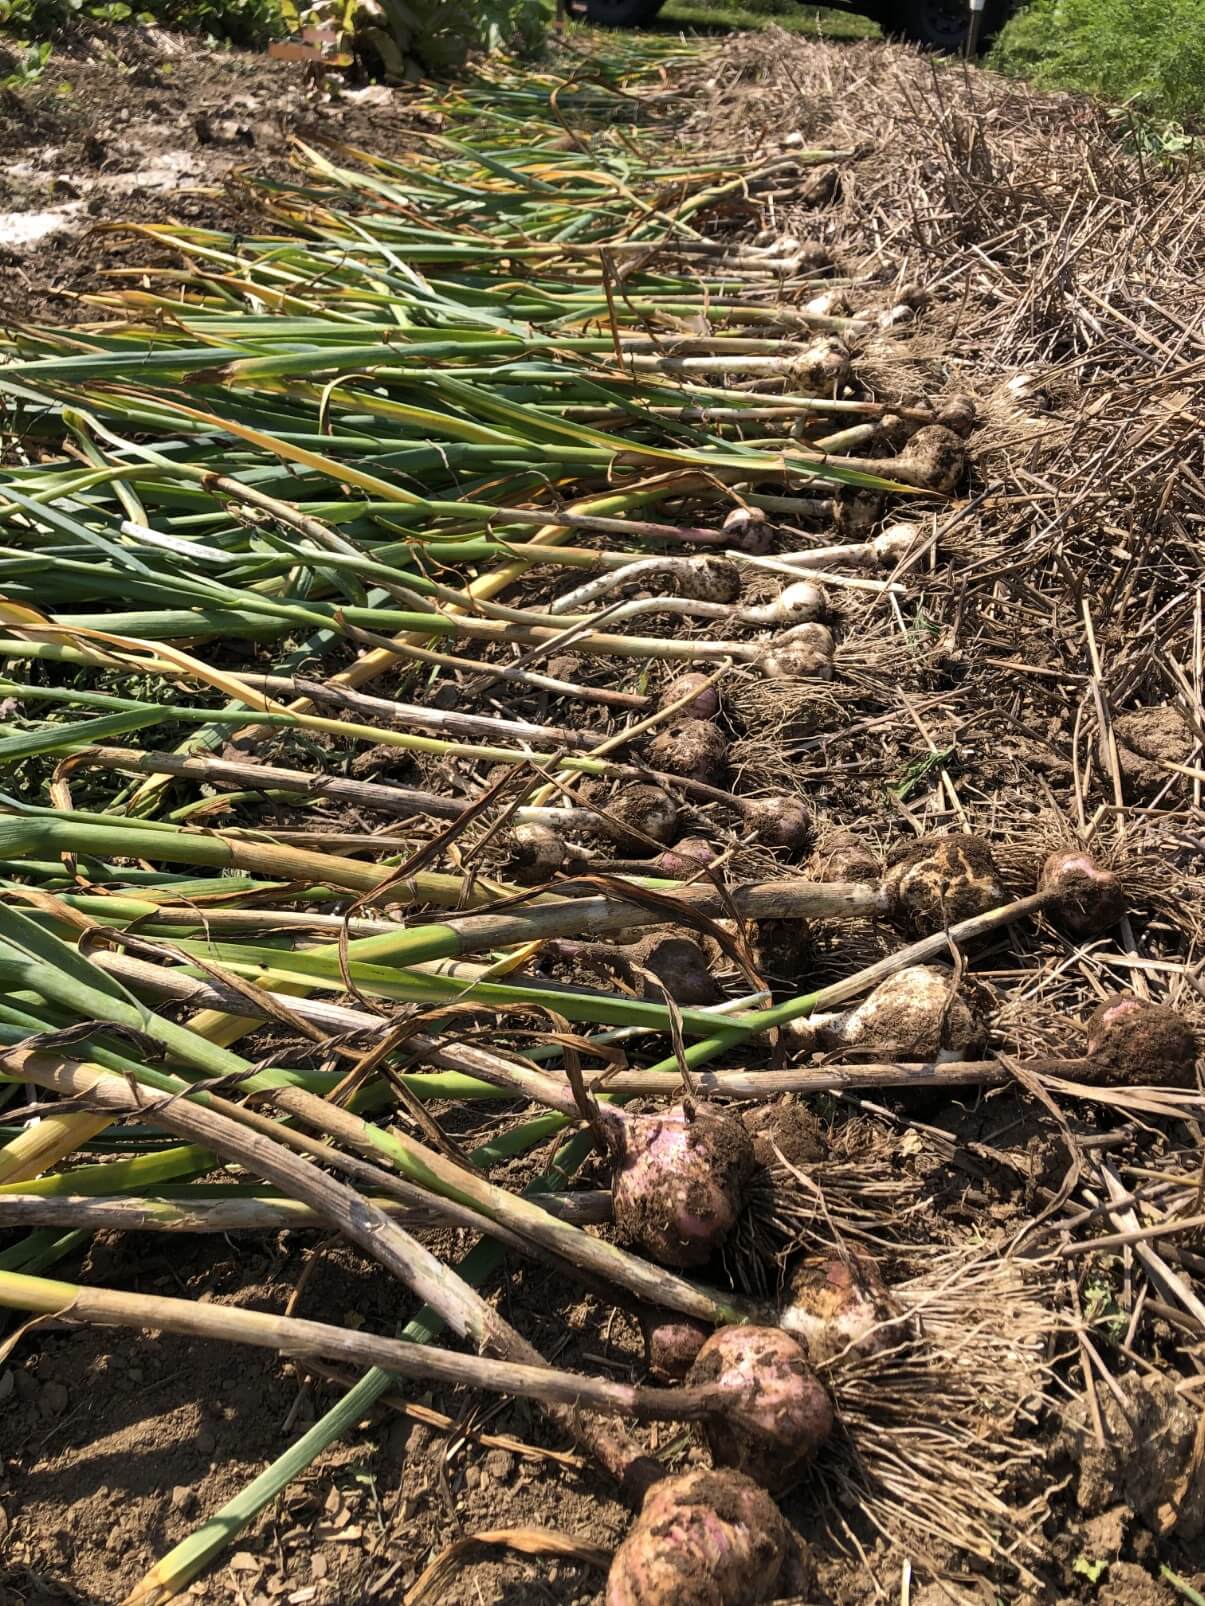 harvested garlic plants laid out in a row